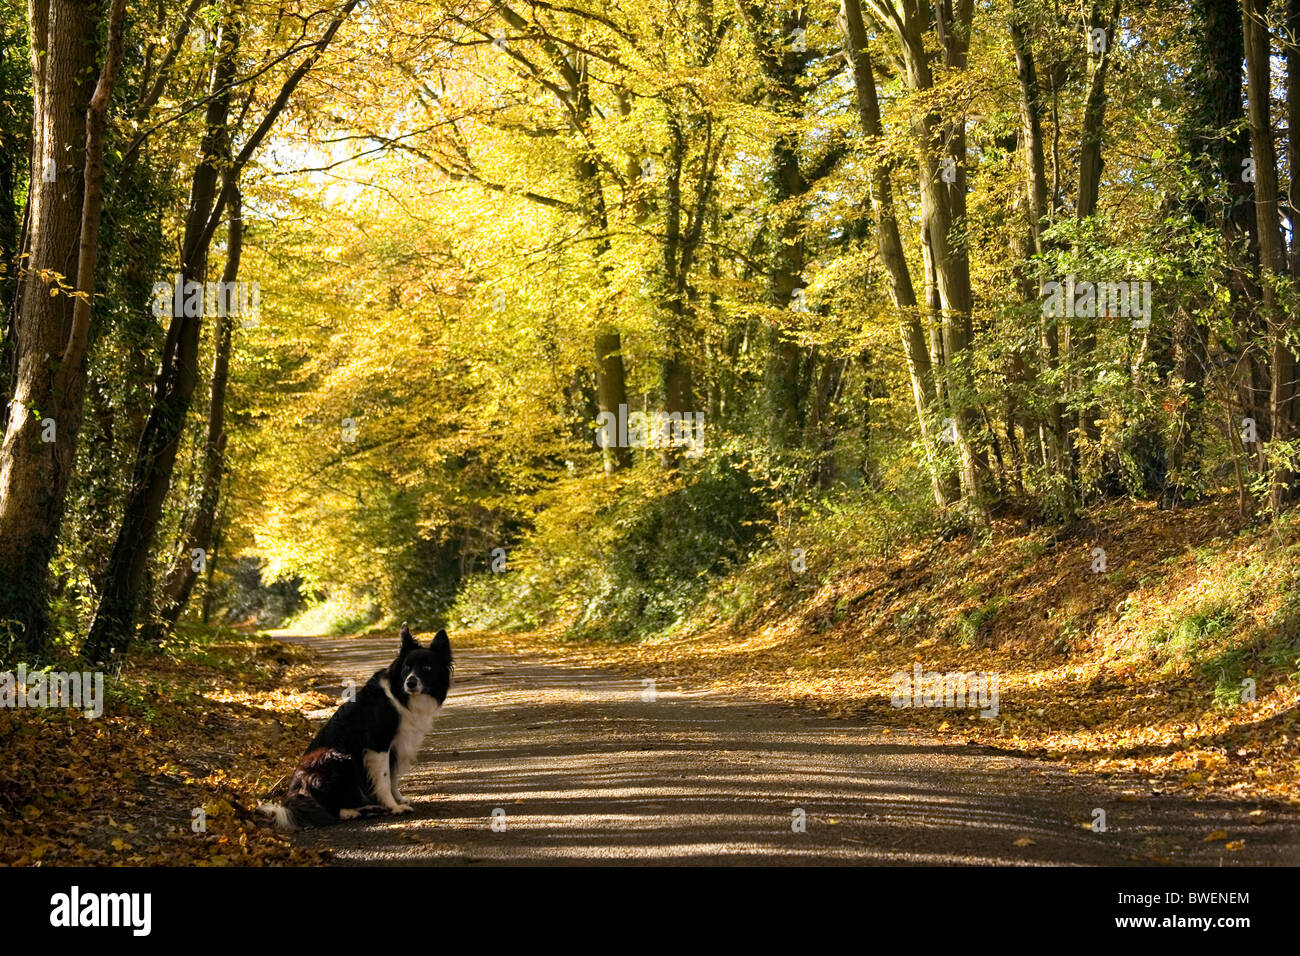 Border collie sits beside quiet country lane covered in autumn leaves beneath a canopy of glowing golden hornbeam trees Kent UK Stock Photo